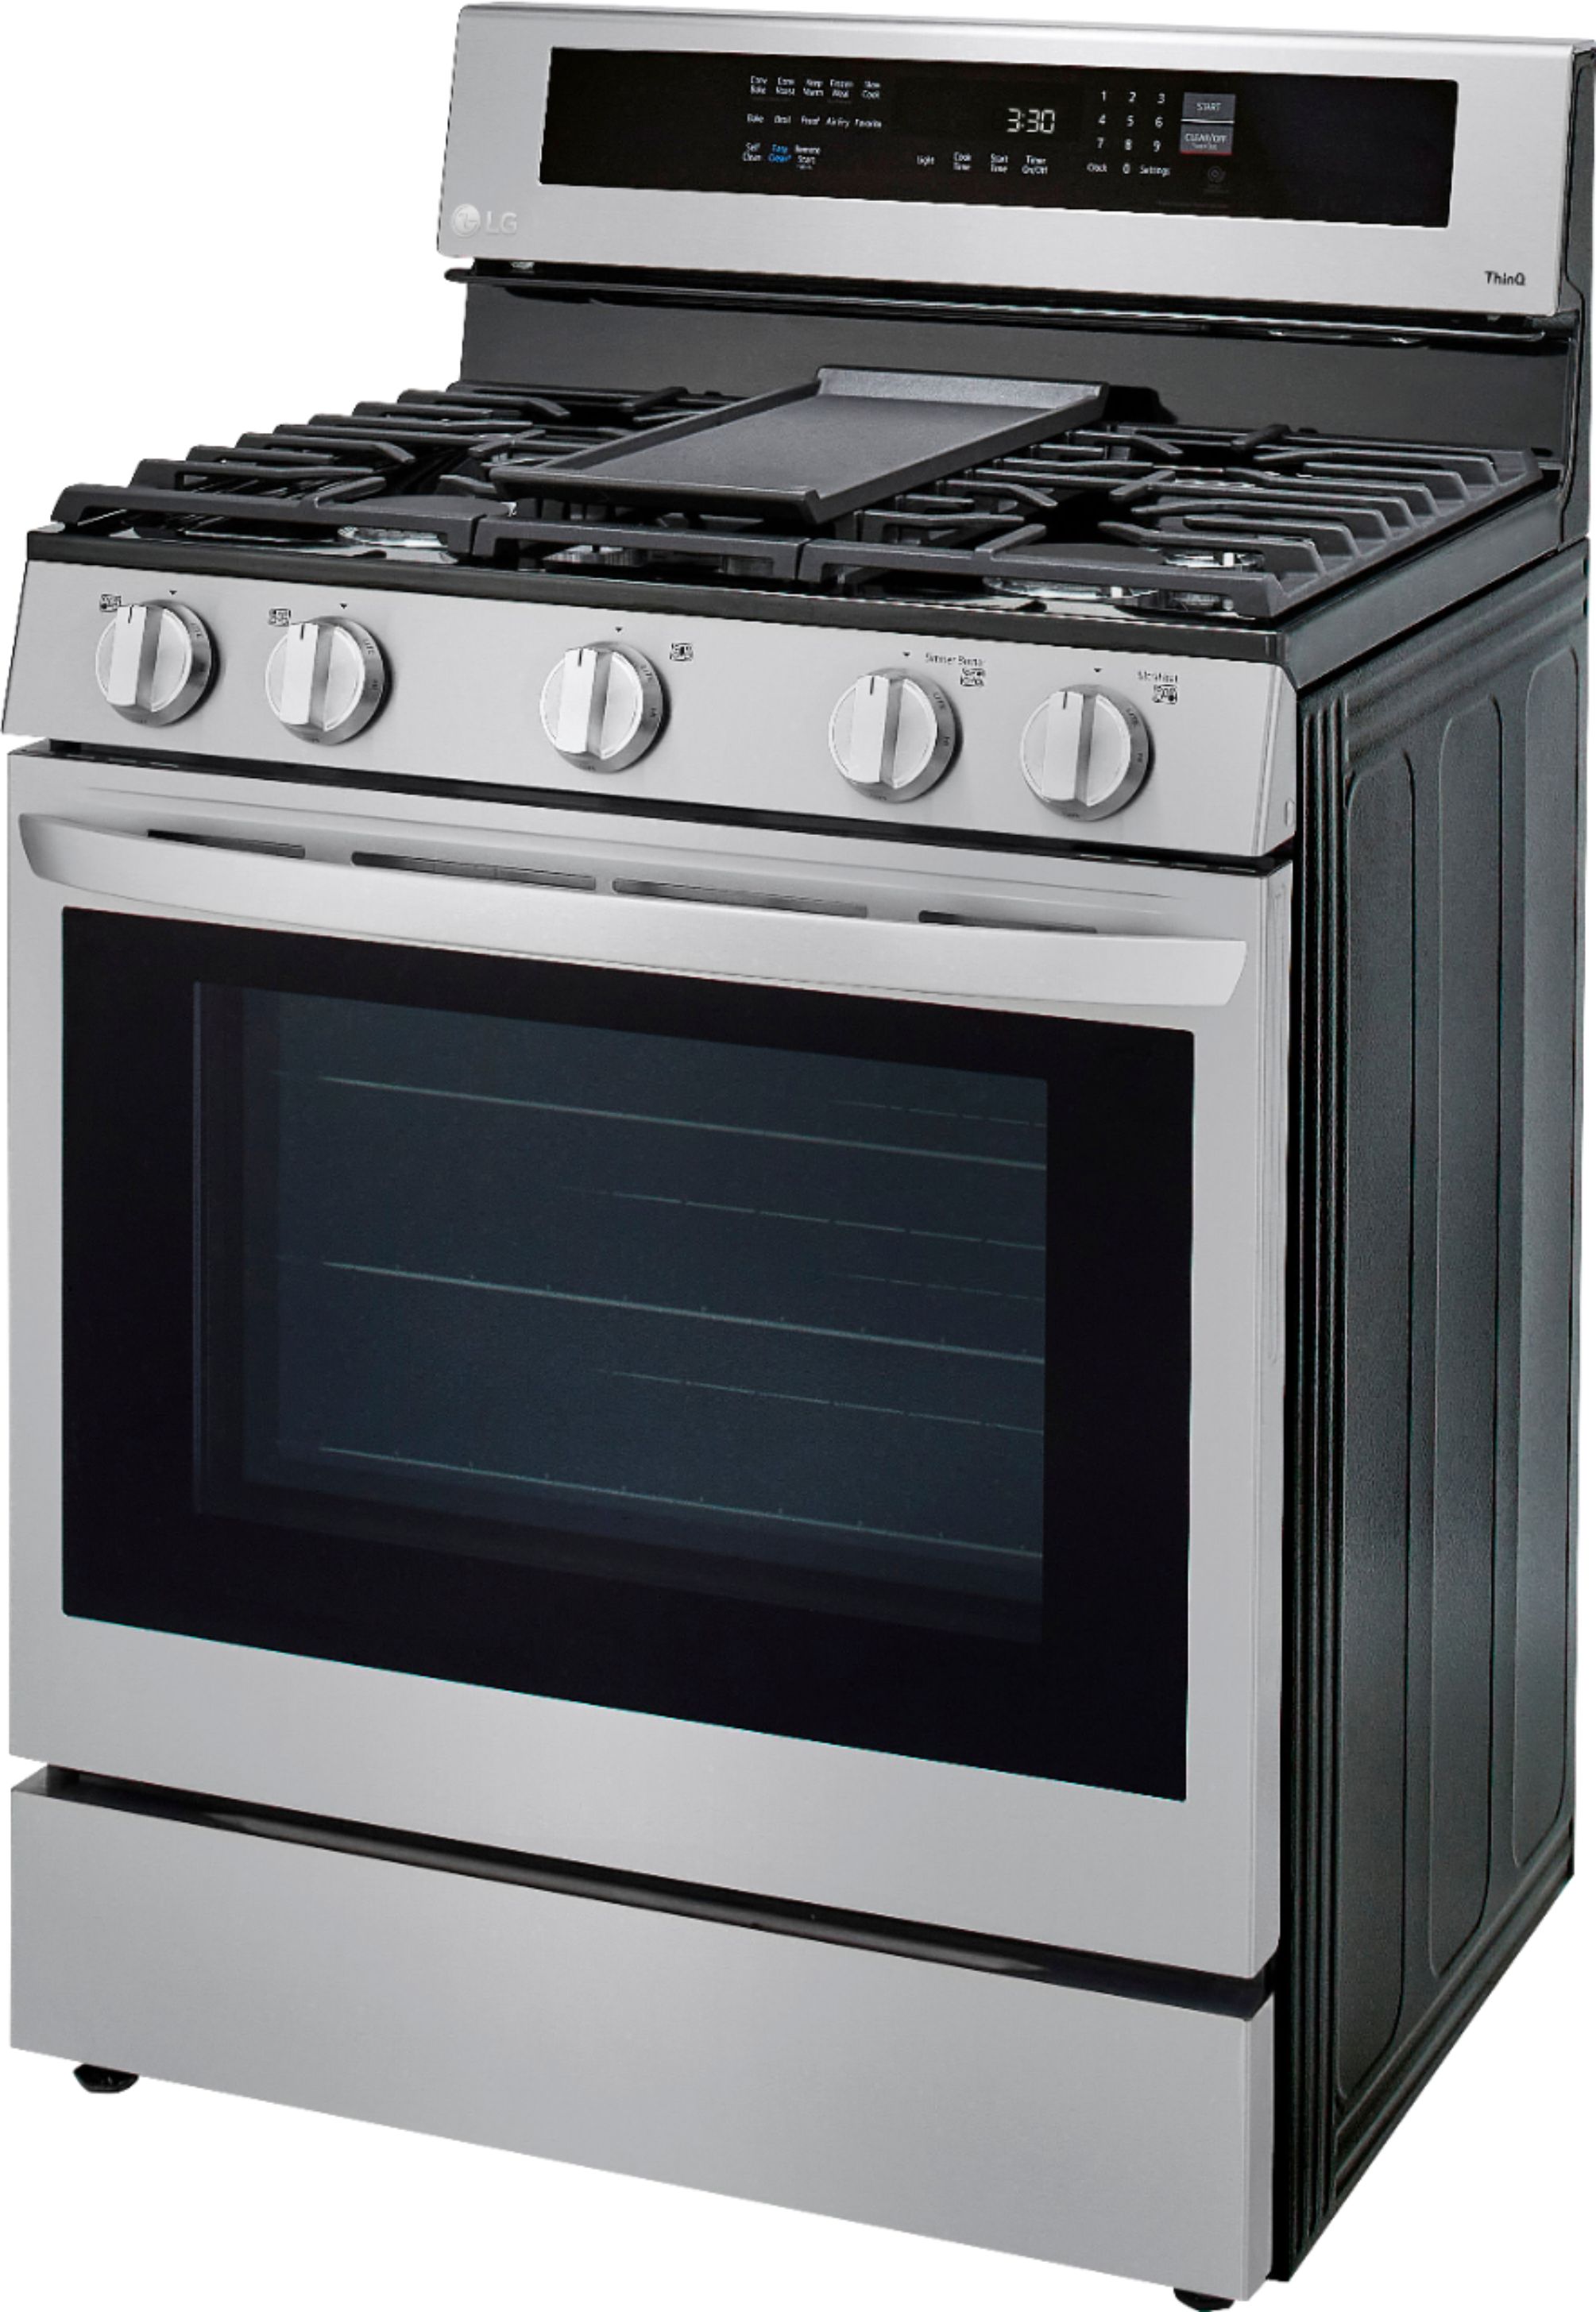 Angle View: LG - 5.8 Cu. Ft. Freestanding Gas True Convection Range with EasyClean, InstaView and AirFry - Stainless steel